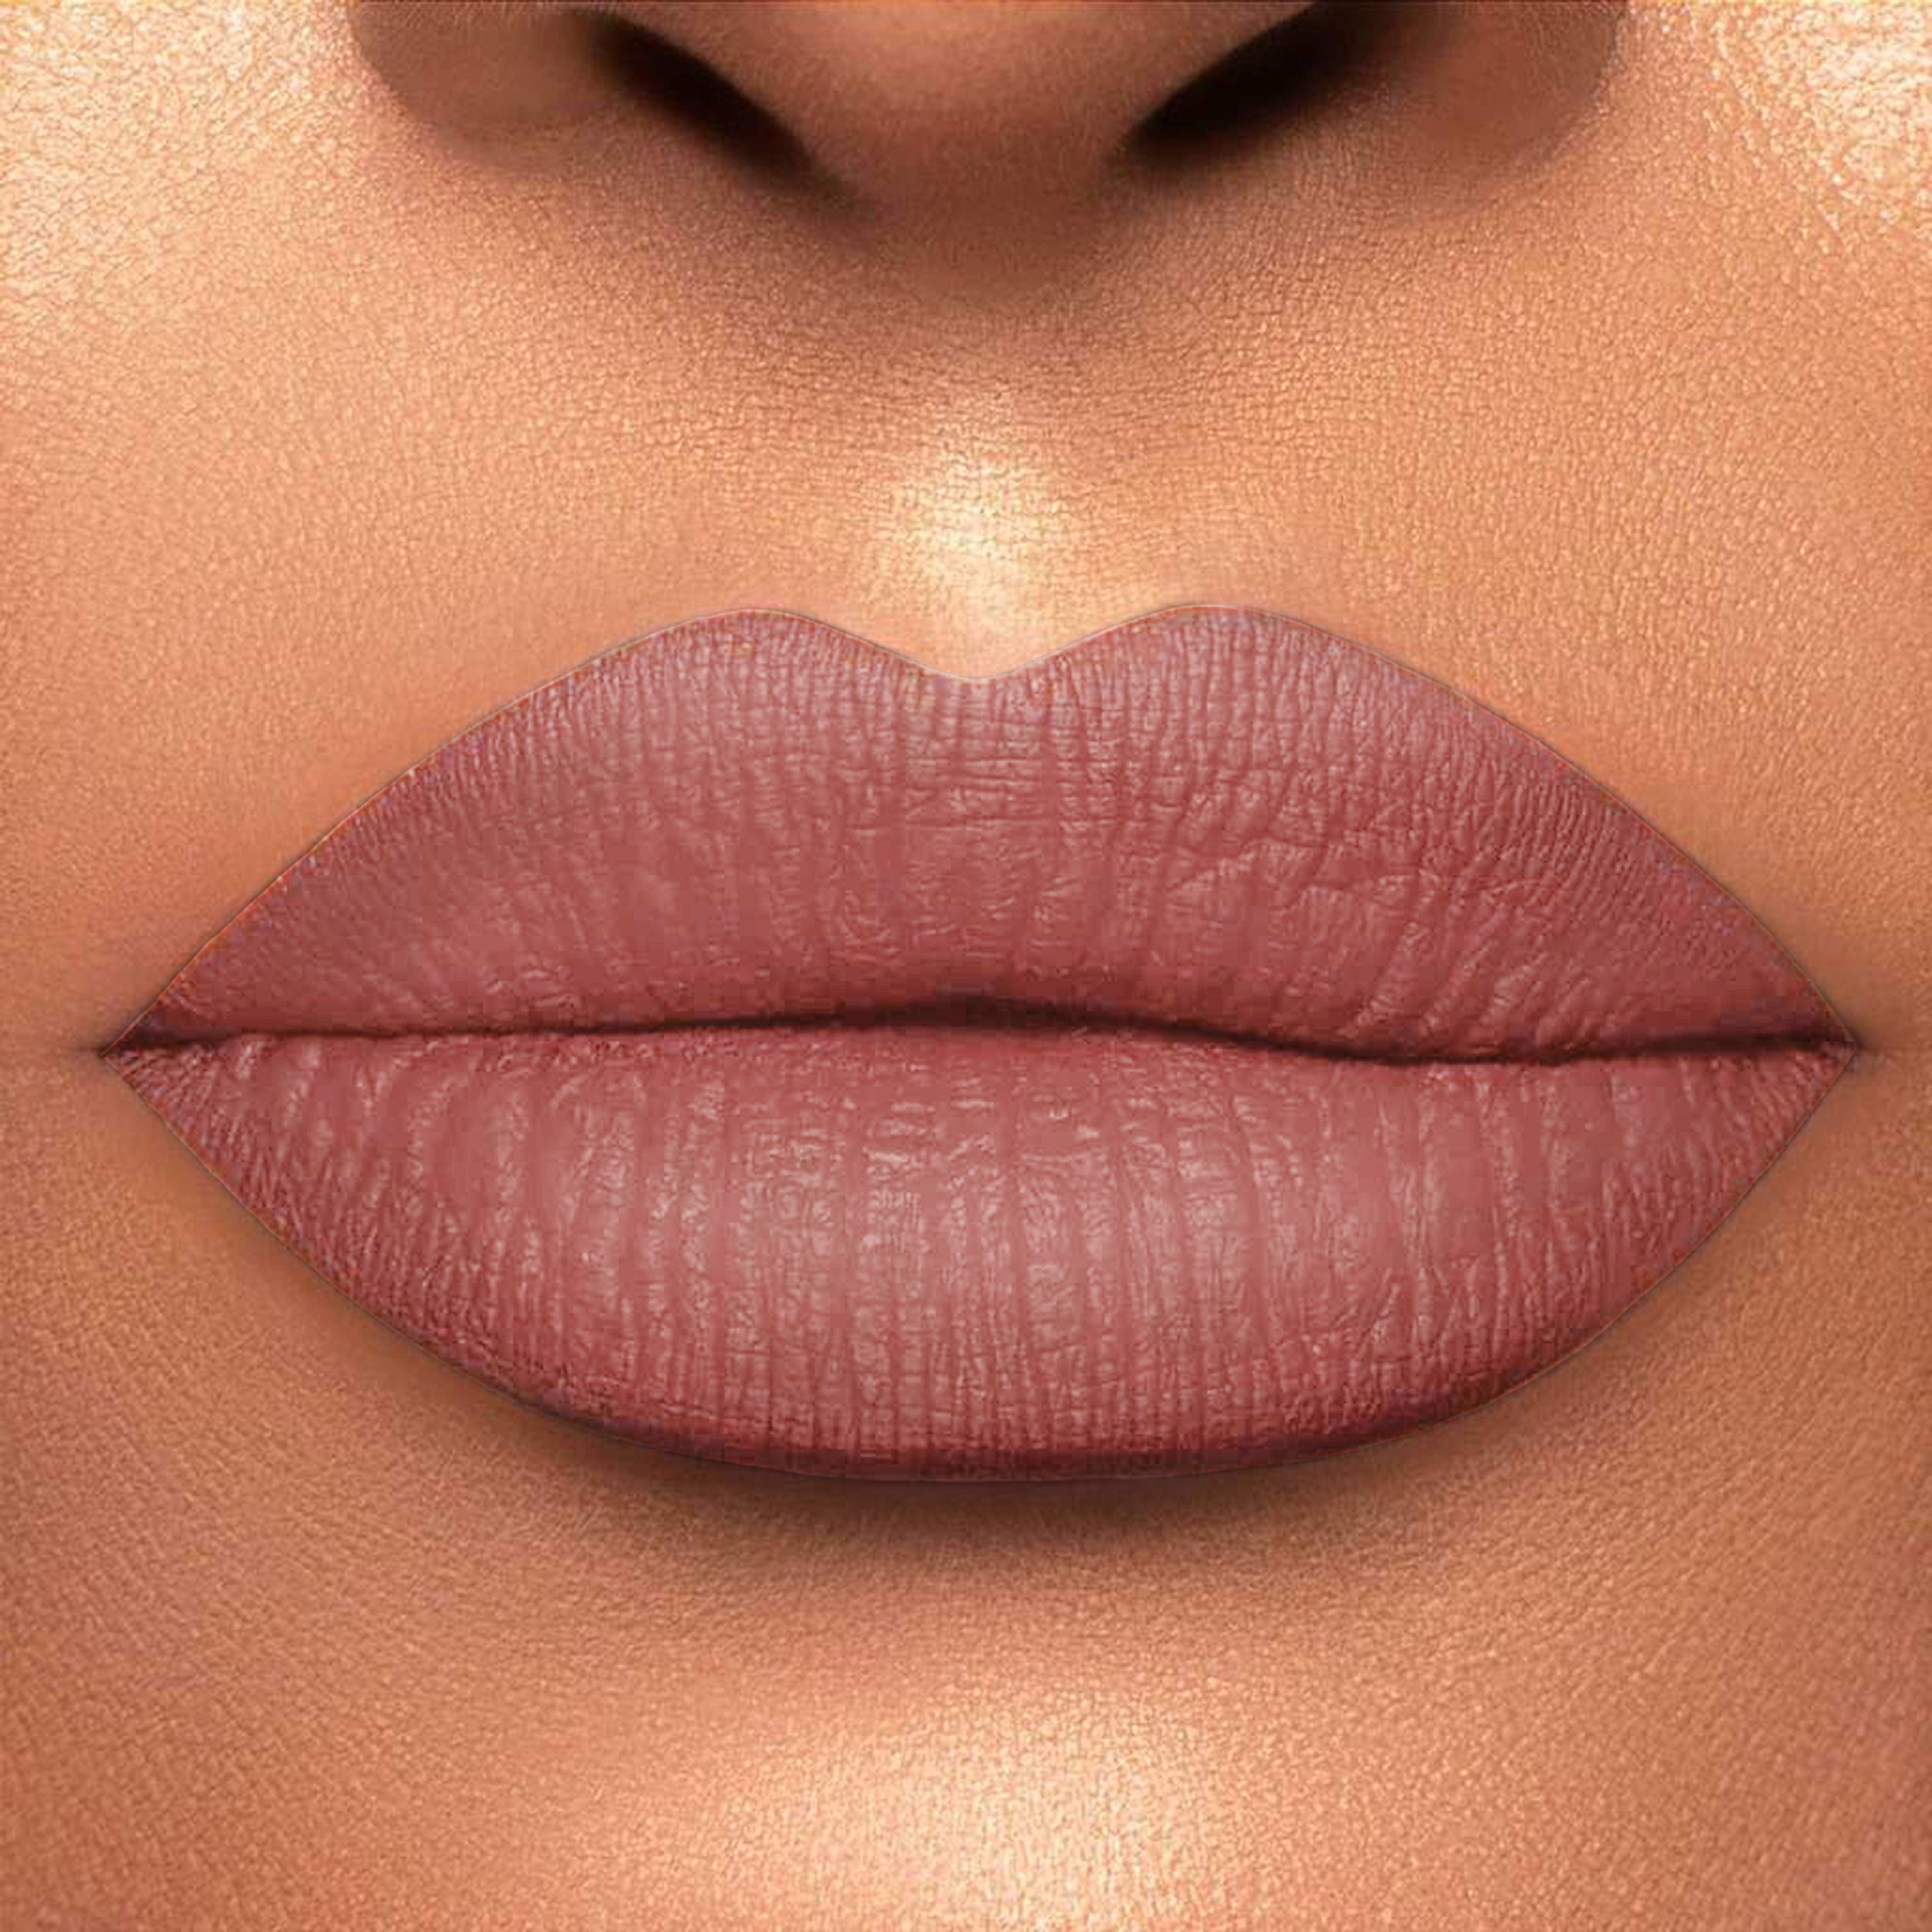 Saweetie lipstick is a matte liquid formula with a peachy tan hue. It glides onto your lips with a lightweight finish and stays put all night long. The creamy formul